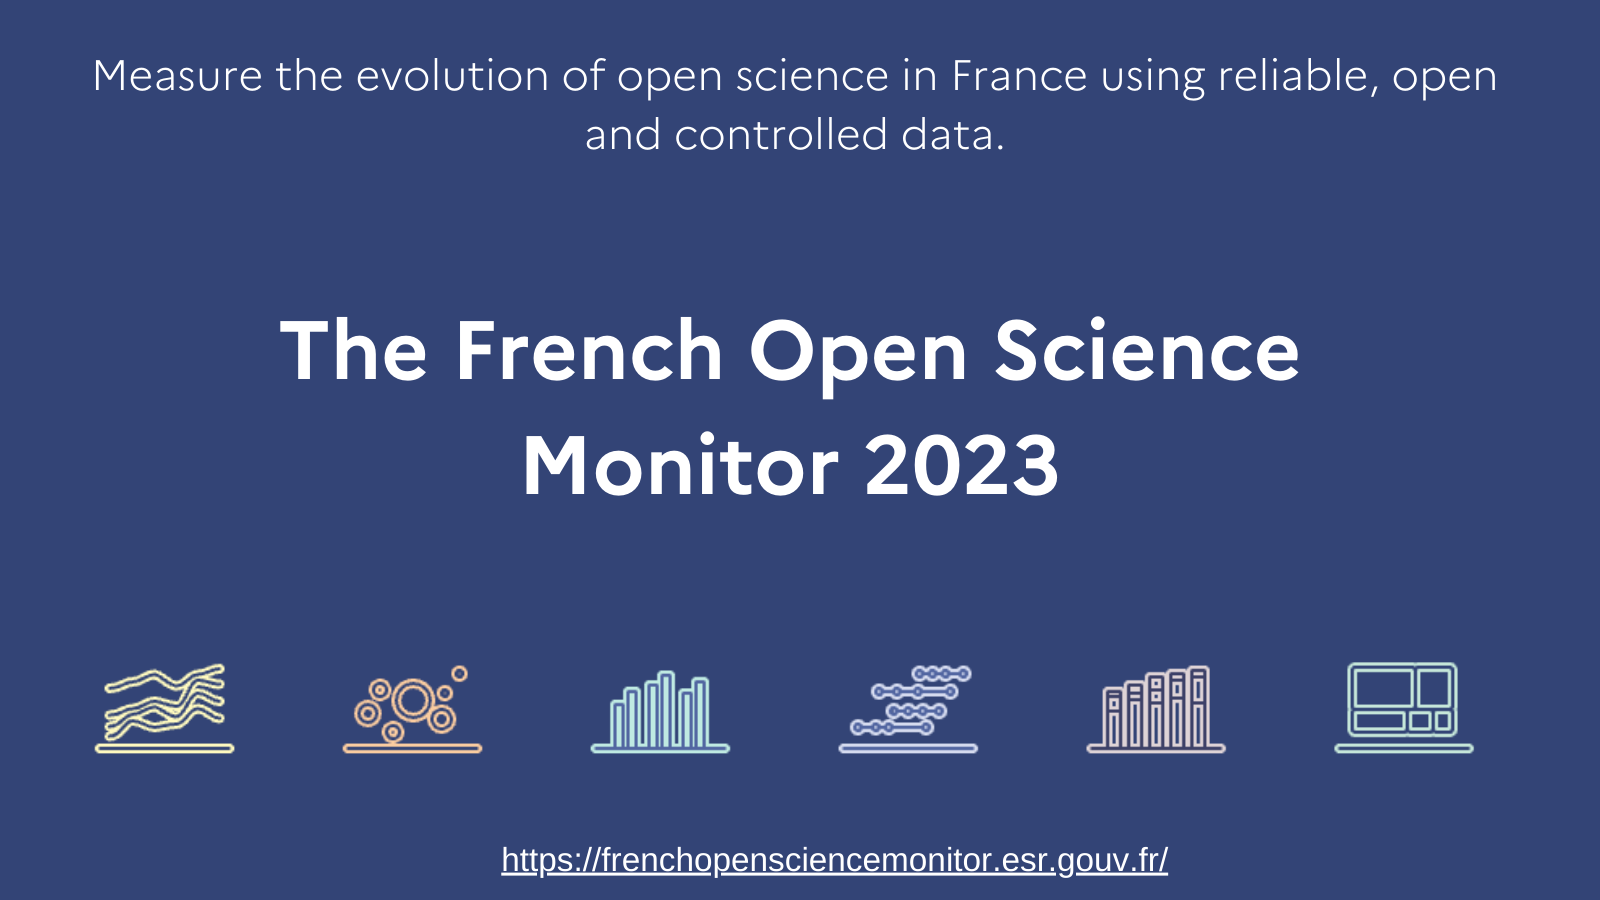 illustration A new issue of the French Open Science Monitor